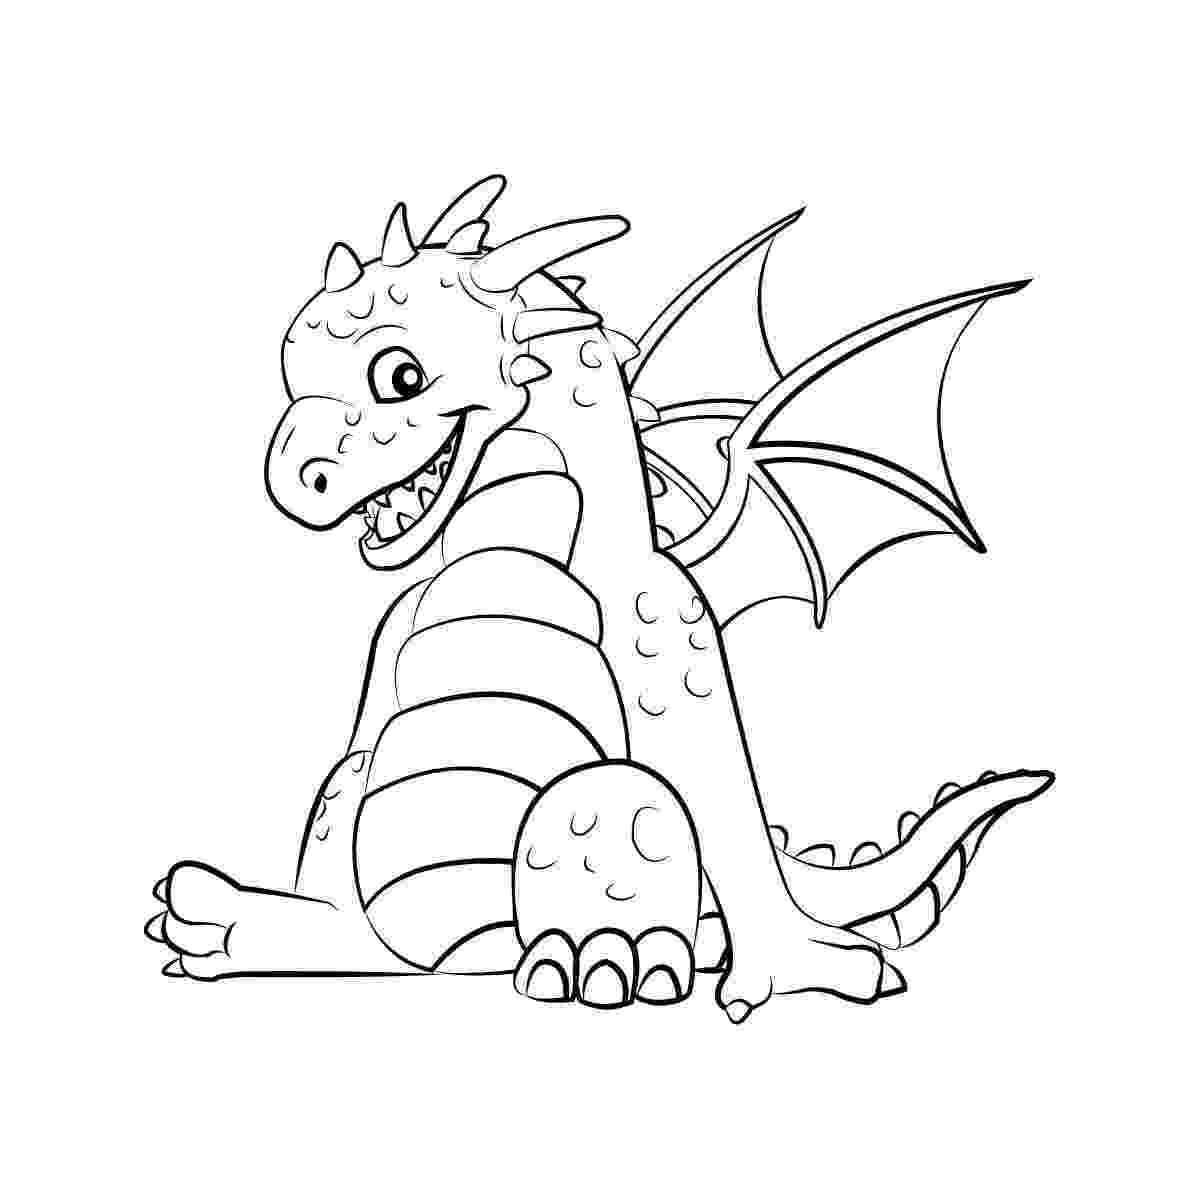 coloring dragon mudwing dragon from wings of fire coloring page free coloring dragon 